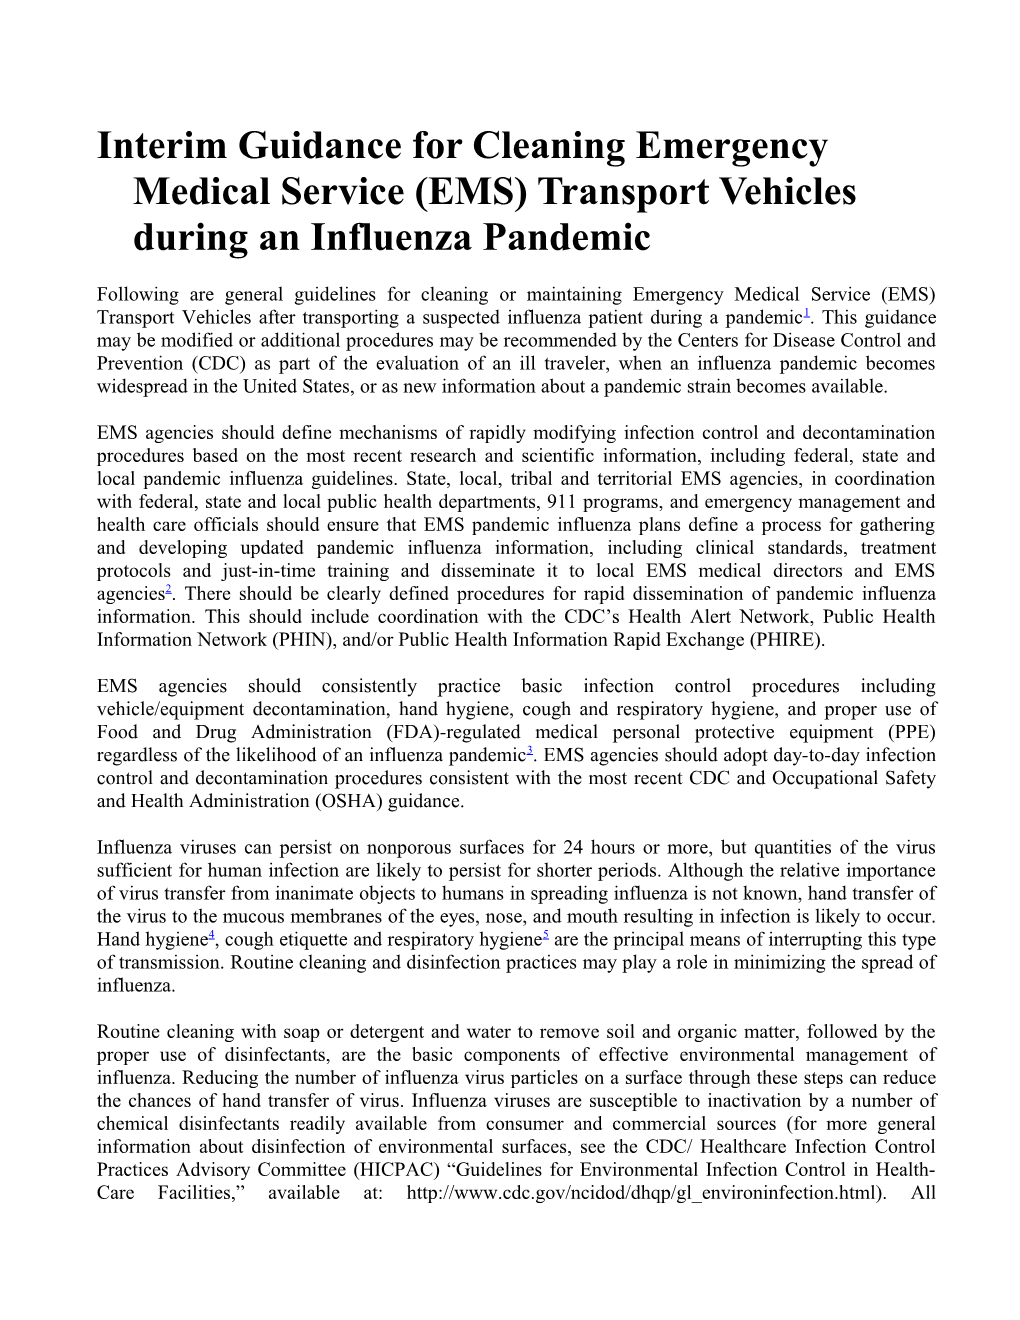 Interim Guidance for Cleaning Emergency Medical Service (EMS) Transport Vehicles During